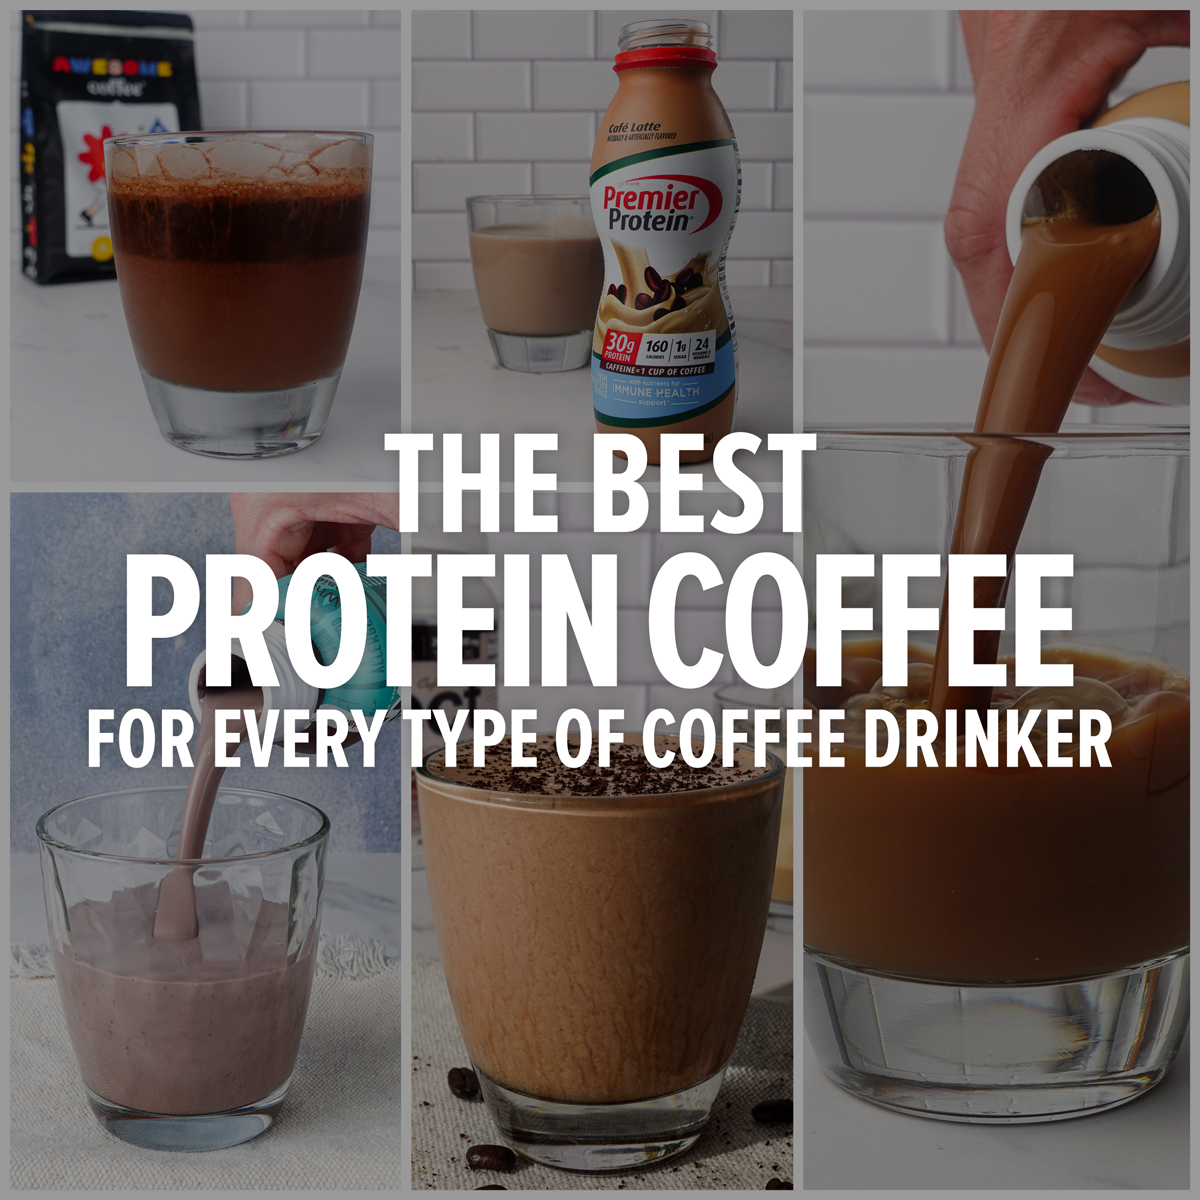 The best protein coffee